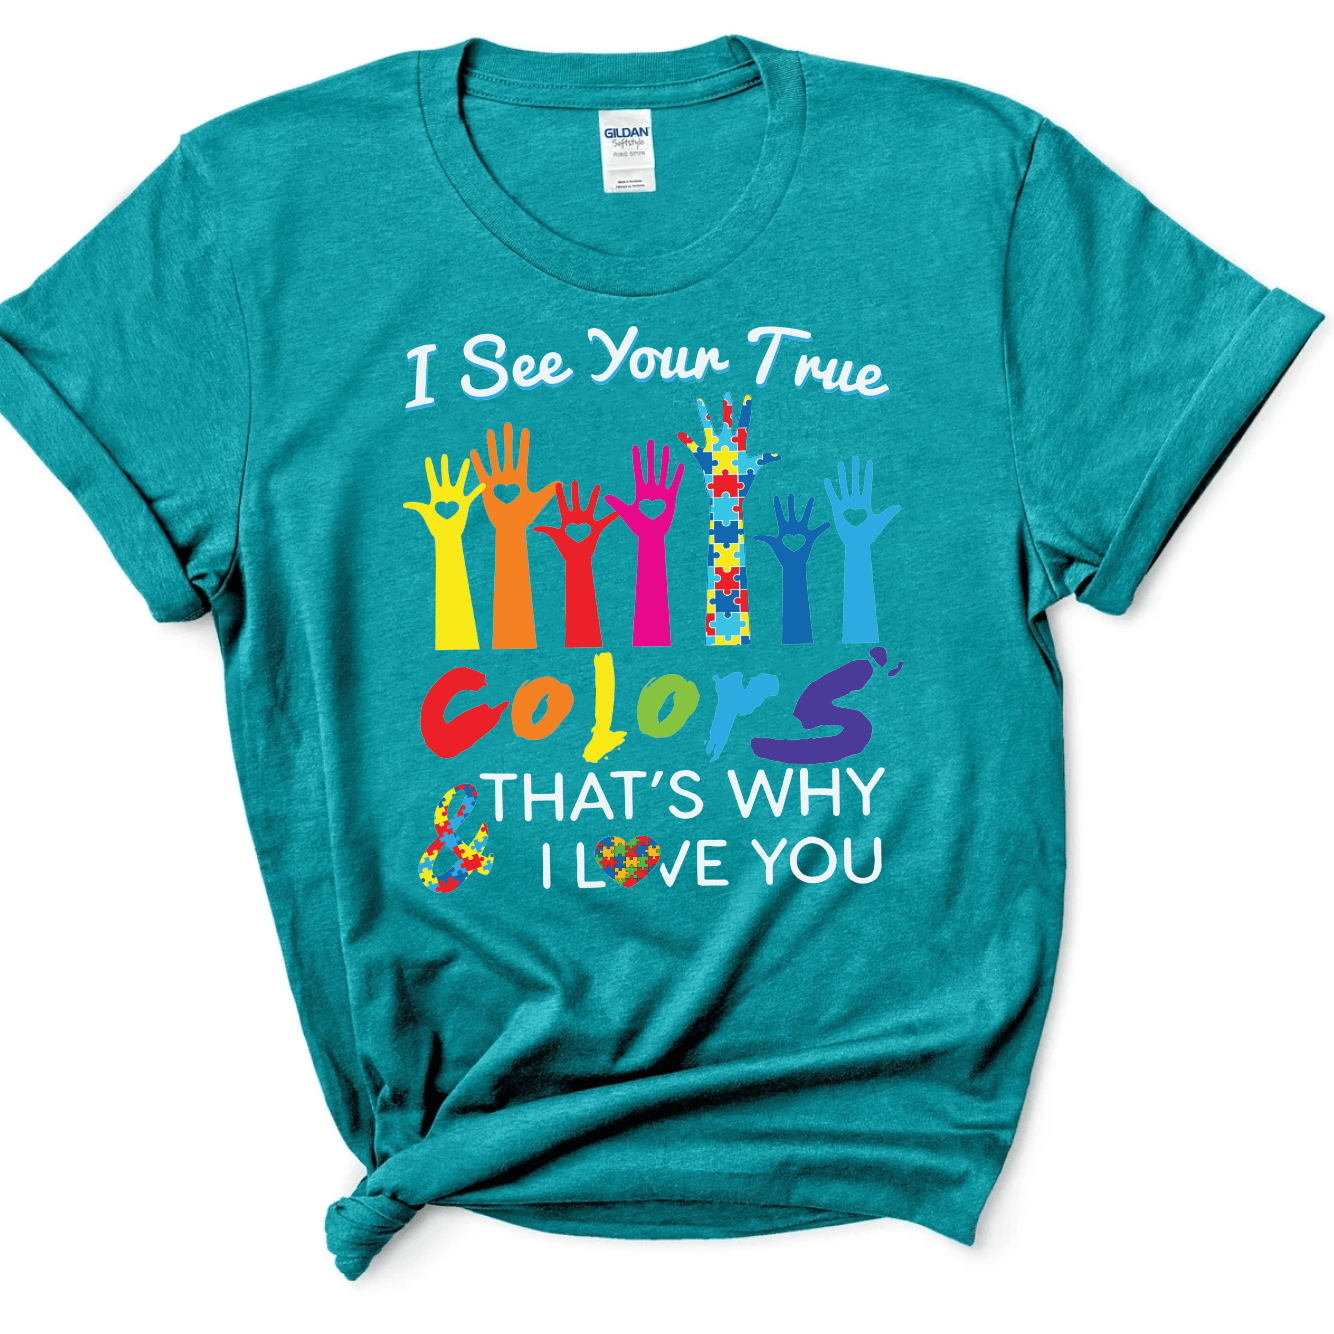 I See your True Colors and thats why i love you - Signastyle Boutique